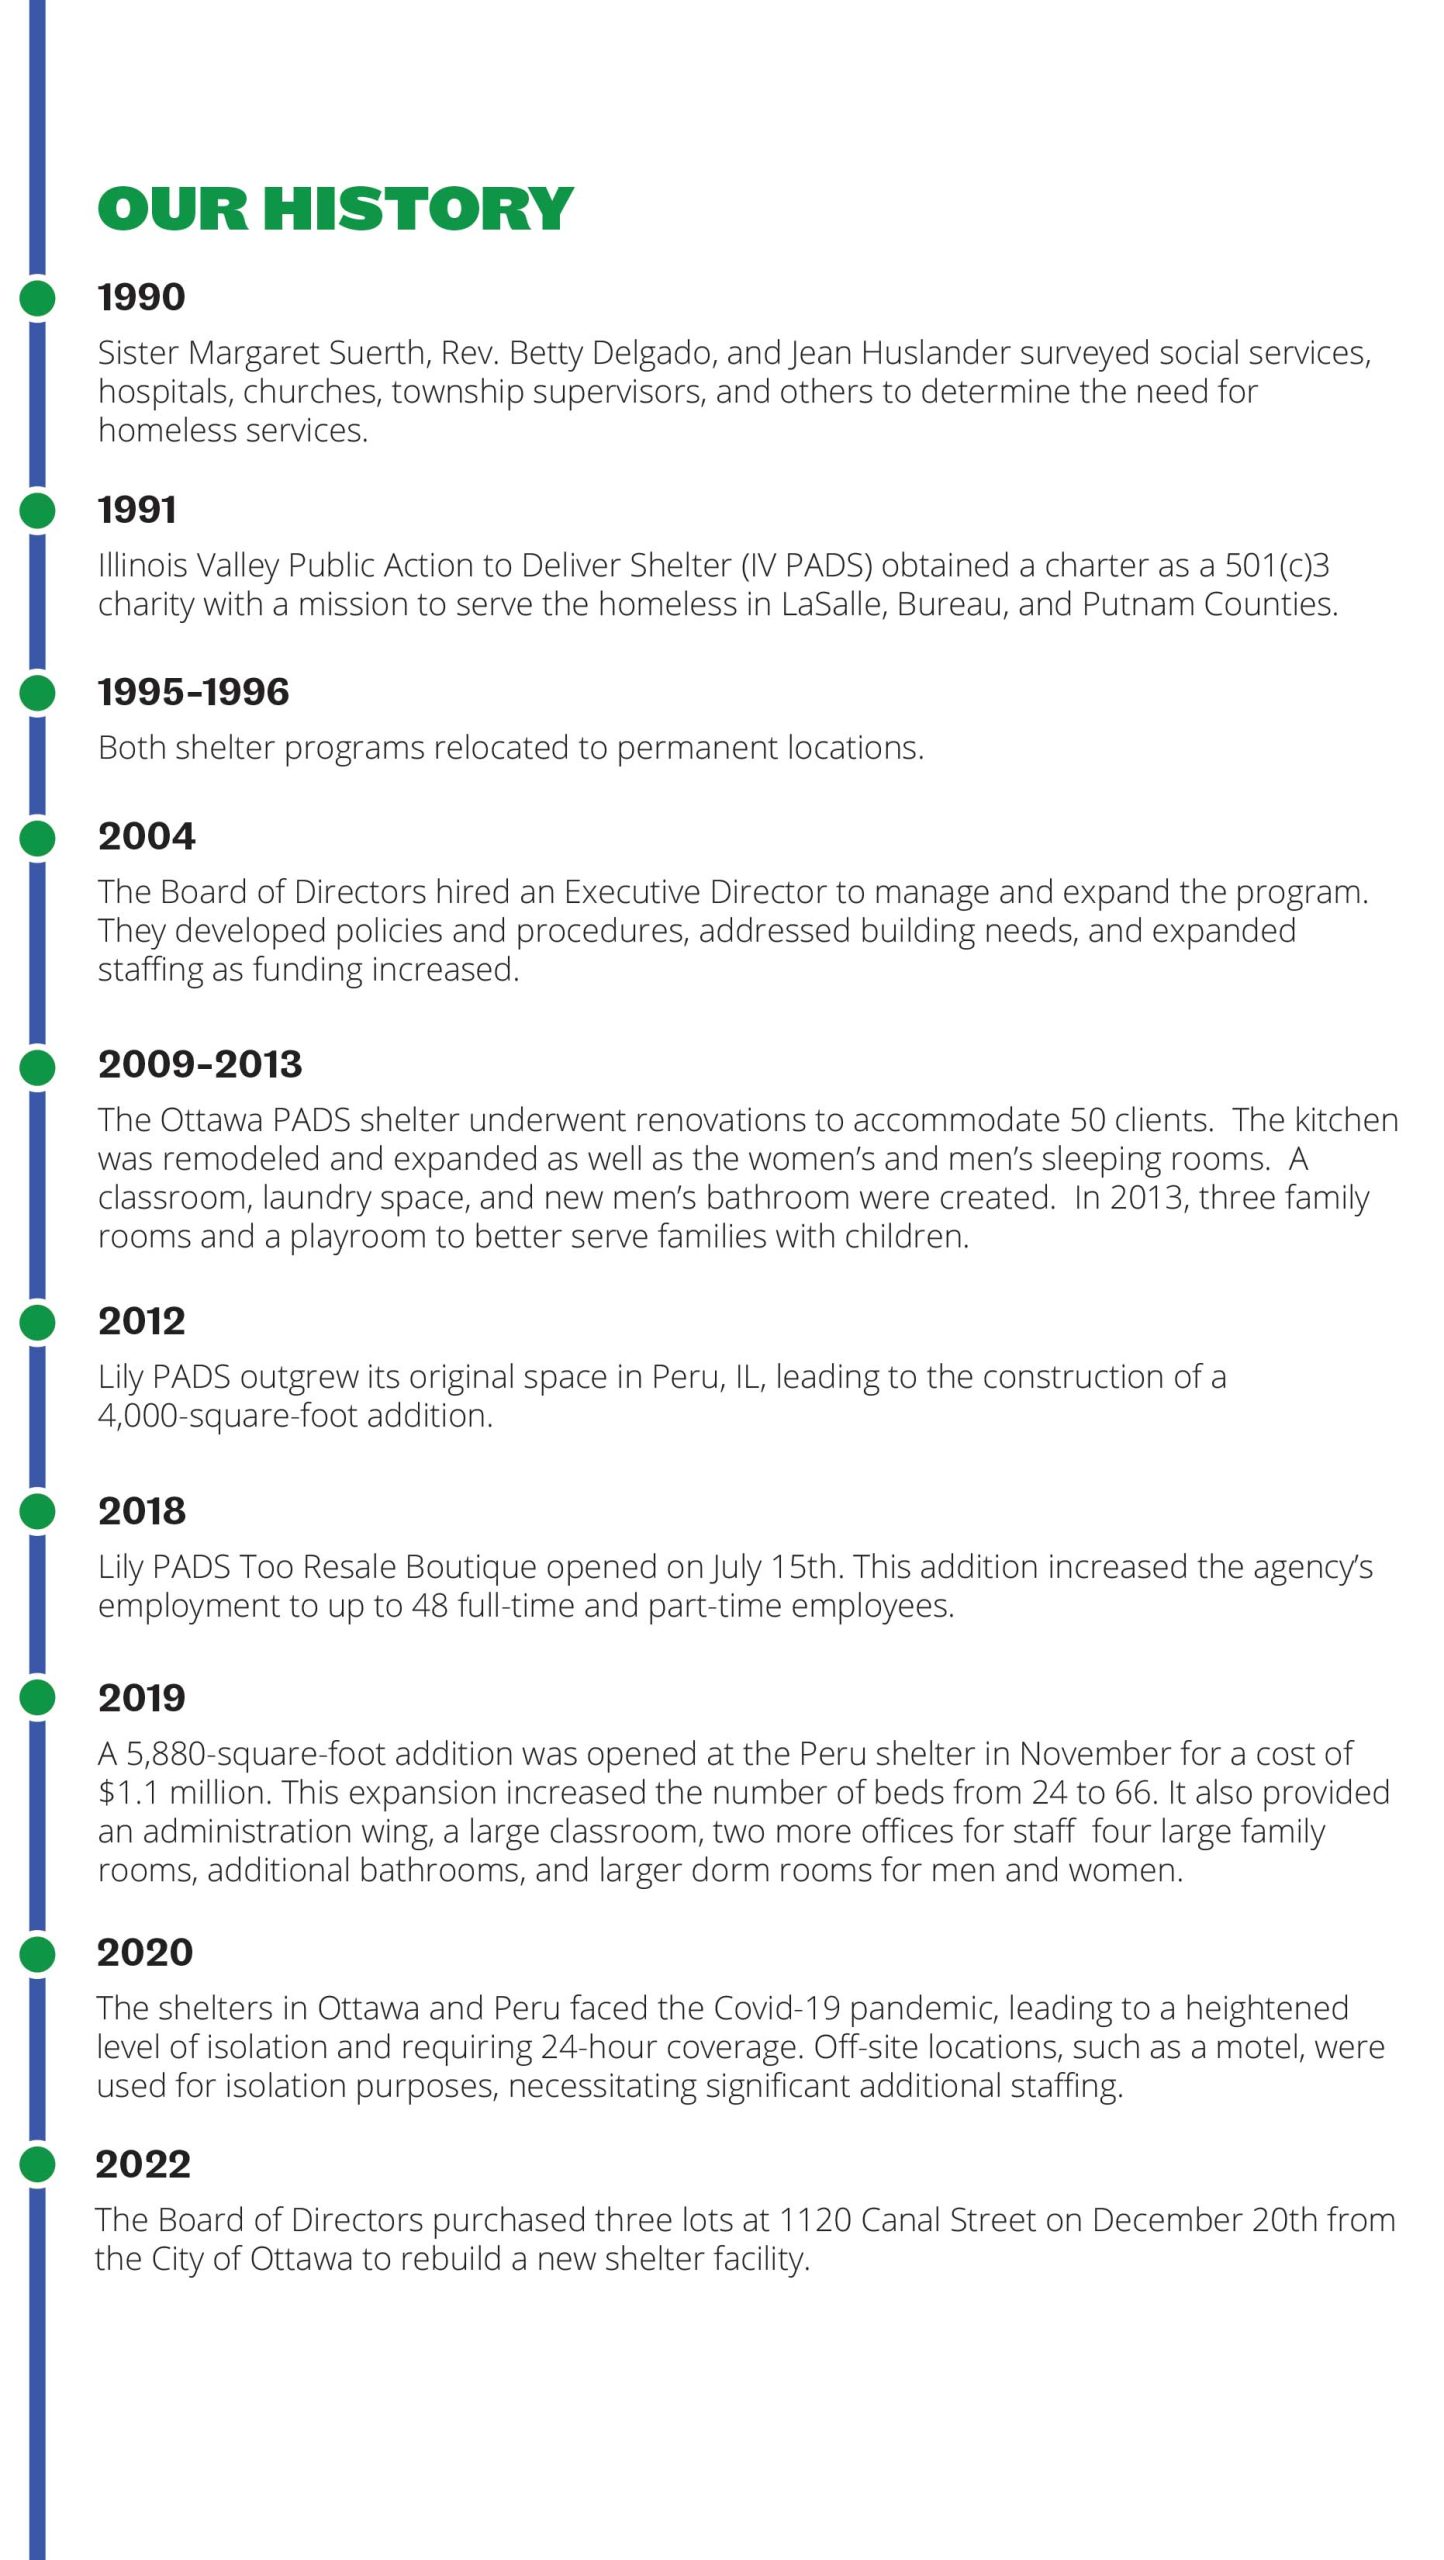 Timeline History of Illinois Valley Pads